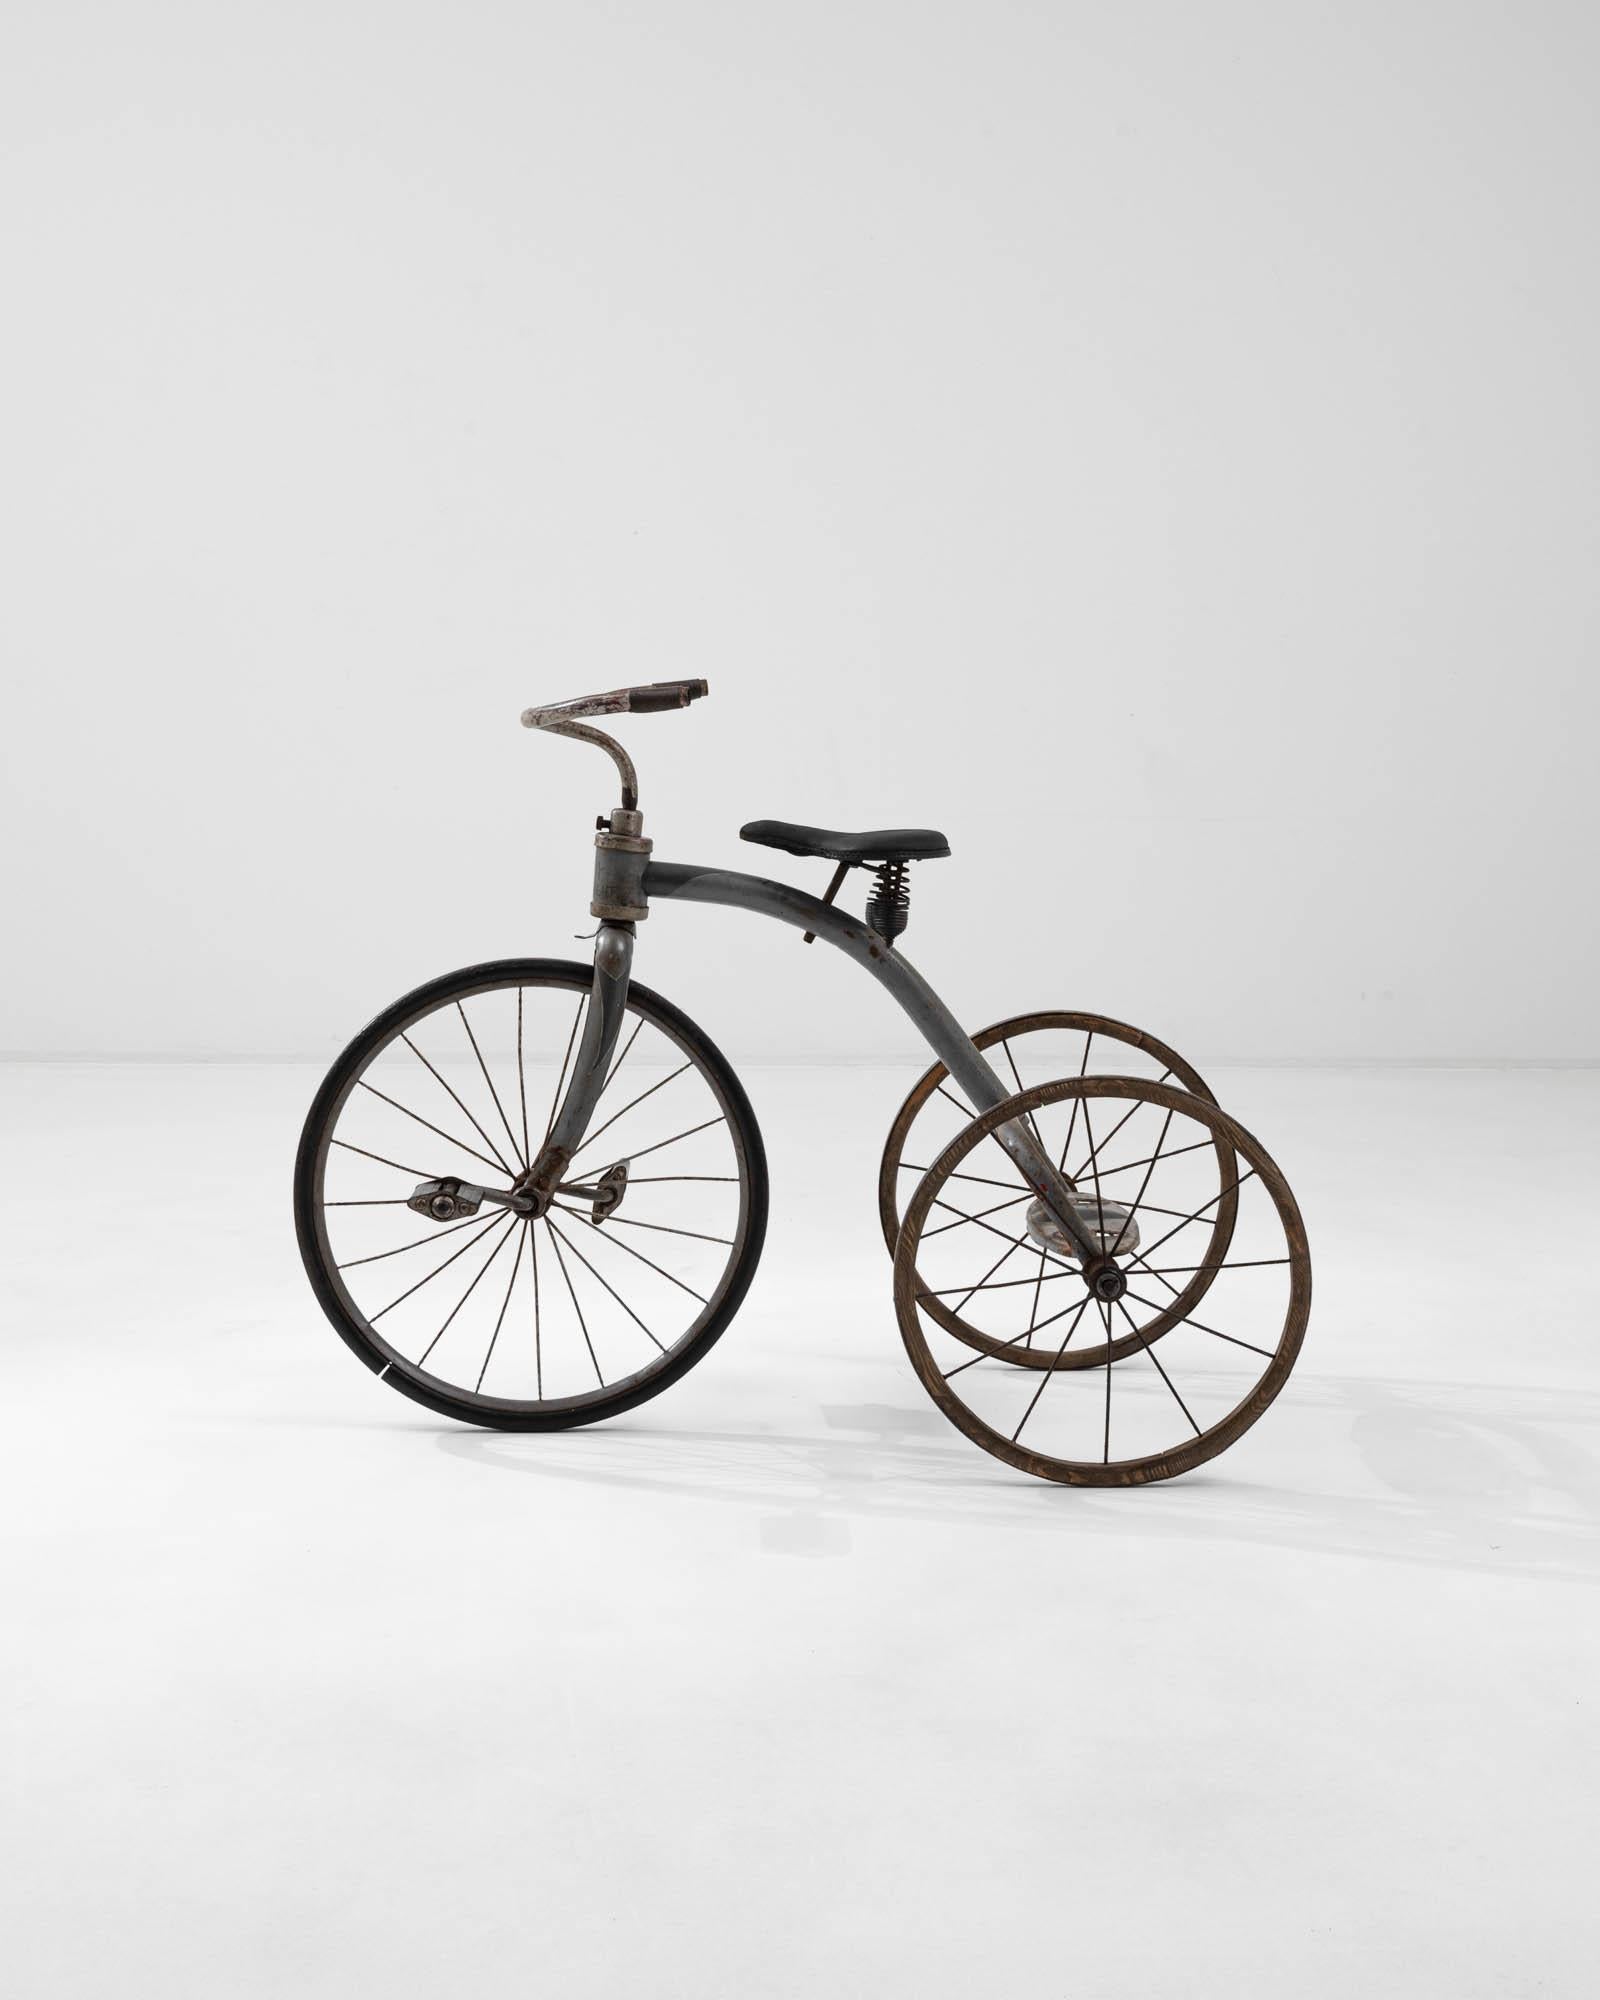 Originating from early 20th-century Central Europe, this tricycle stands as a fascinating relic that offers a window into transportation trends of its time. Distinguished by its robust construction and innovative design, it features a large front